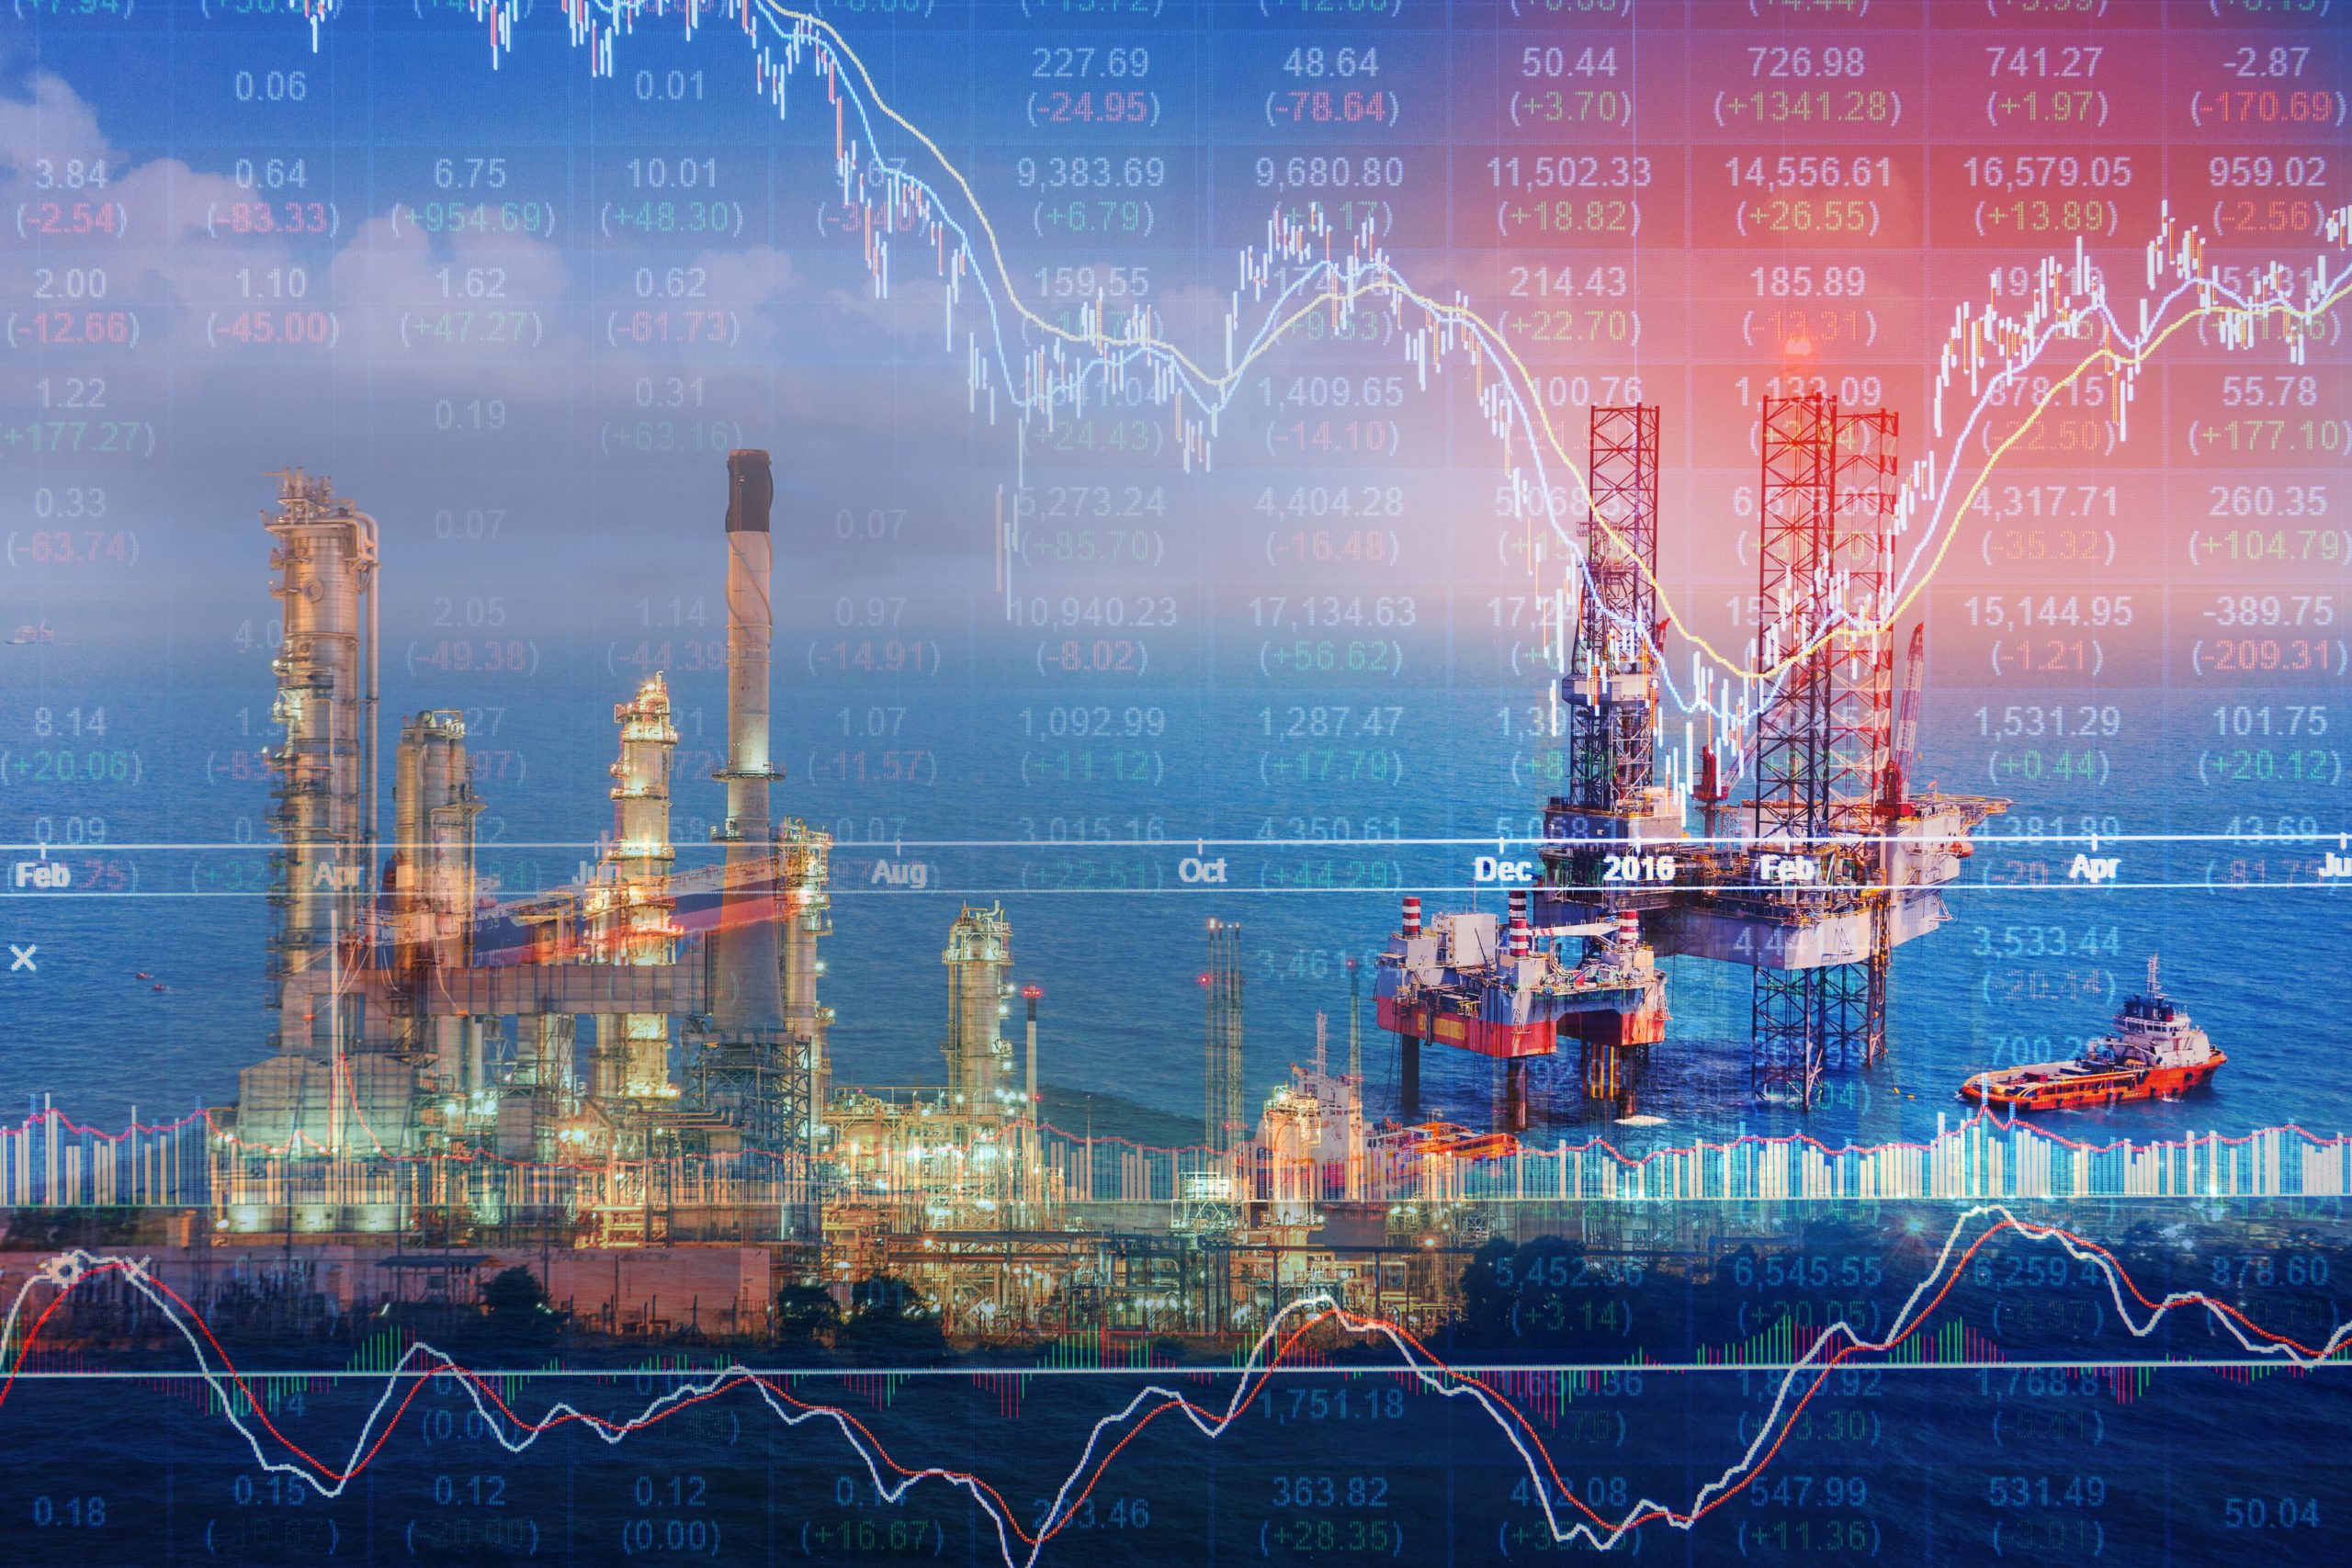 Big Oil’s Optimism Faces Reality Check in Tech-Obsessed Market